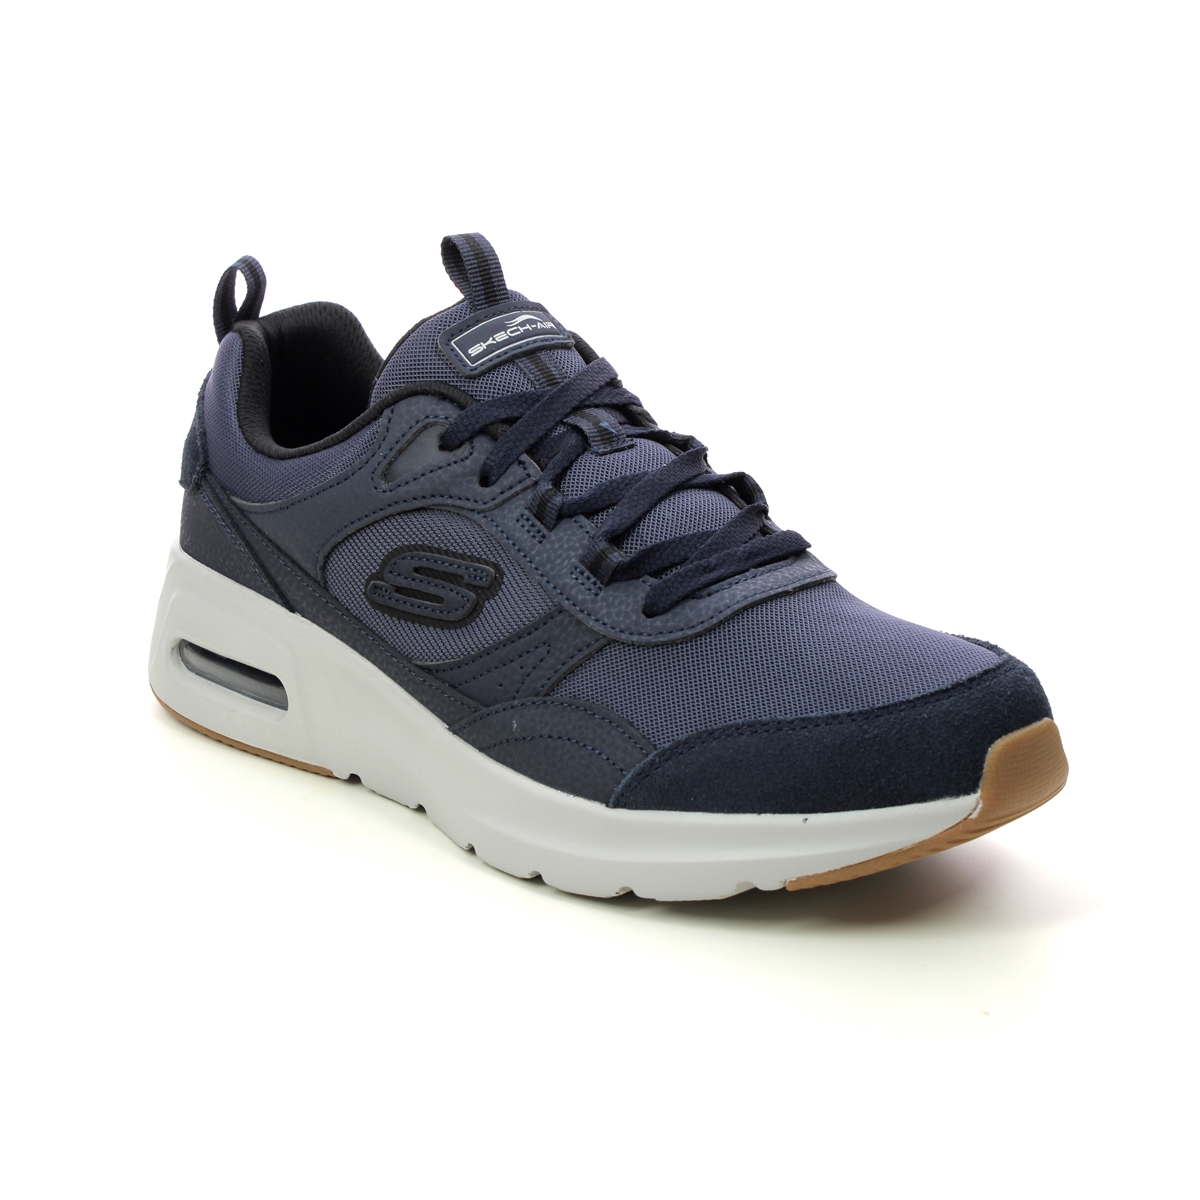 Skechers Skech Air Court NVBK Navy Black Mens trainers 232646 in a Plain Leather and Man-made in Size 9